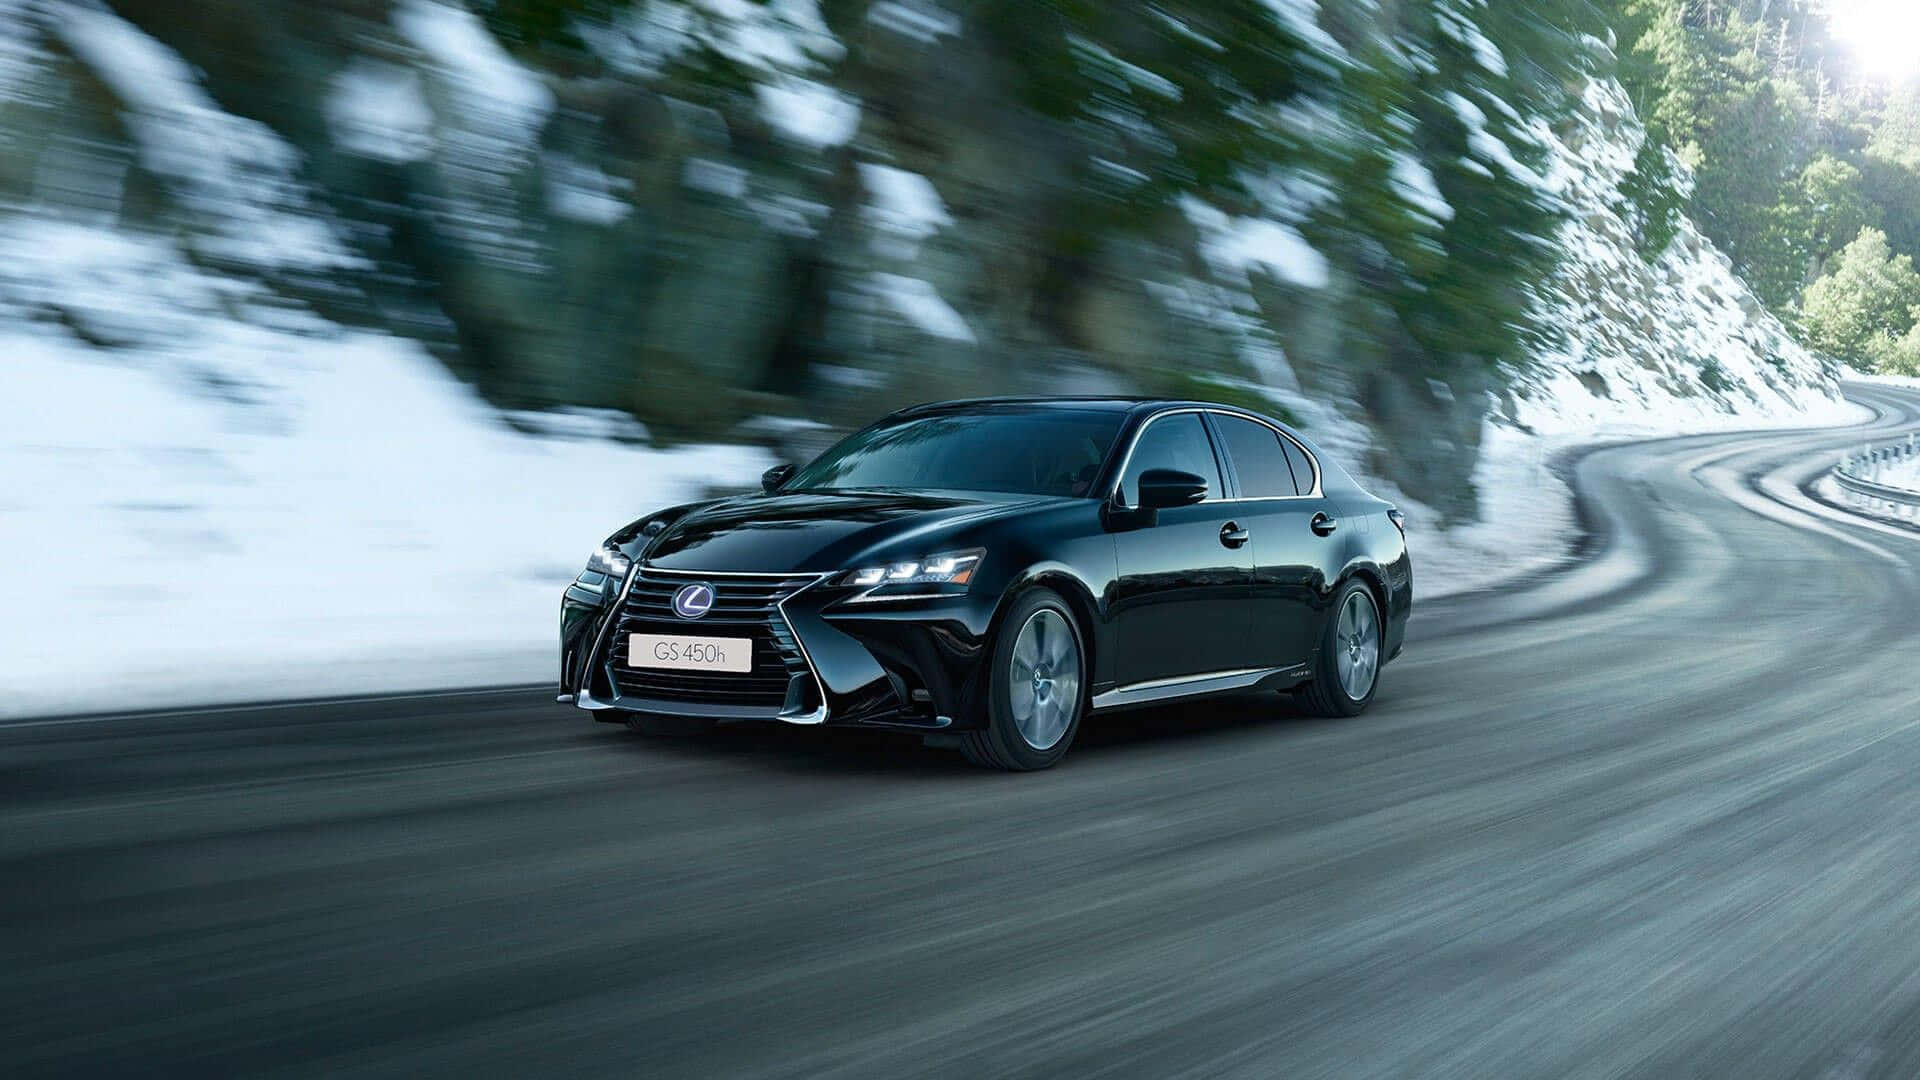 Sleek and Powerful Lexus GS on the Road Wallpaper